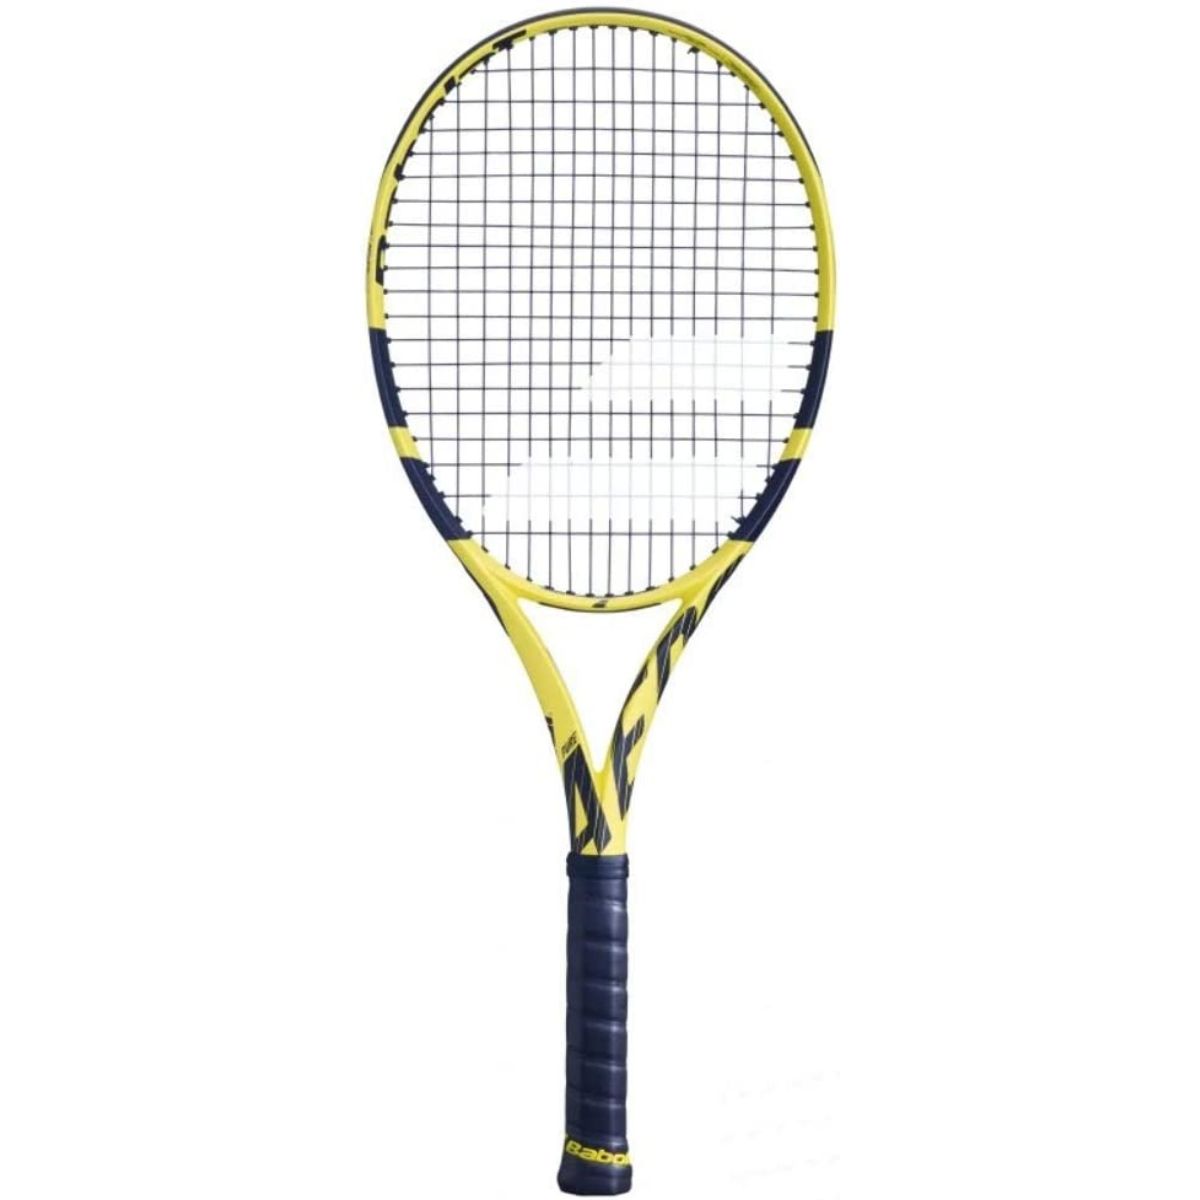 The Best Tennis Rackets for Advanced Players Options:Babolat Pure Aero 2019